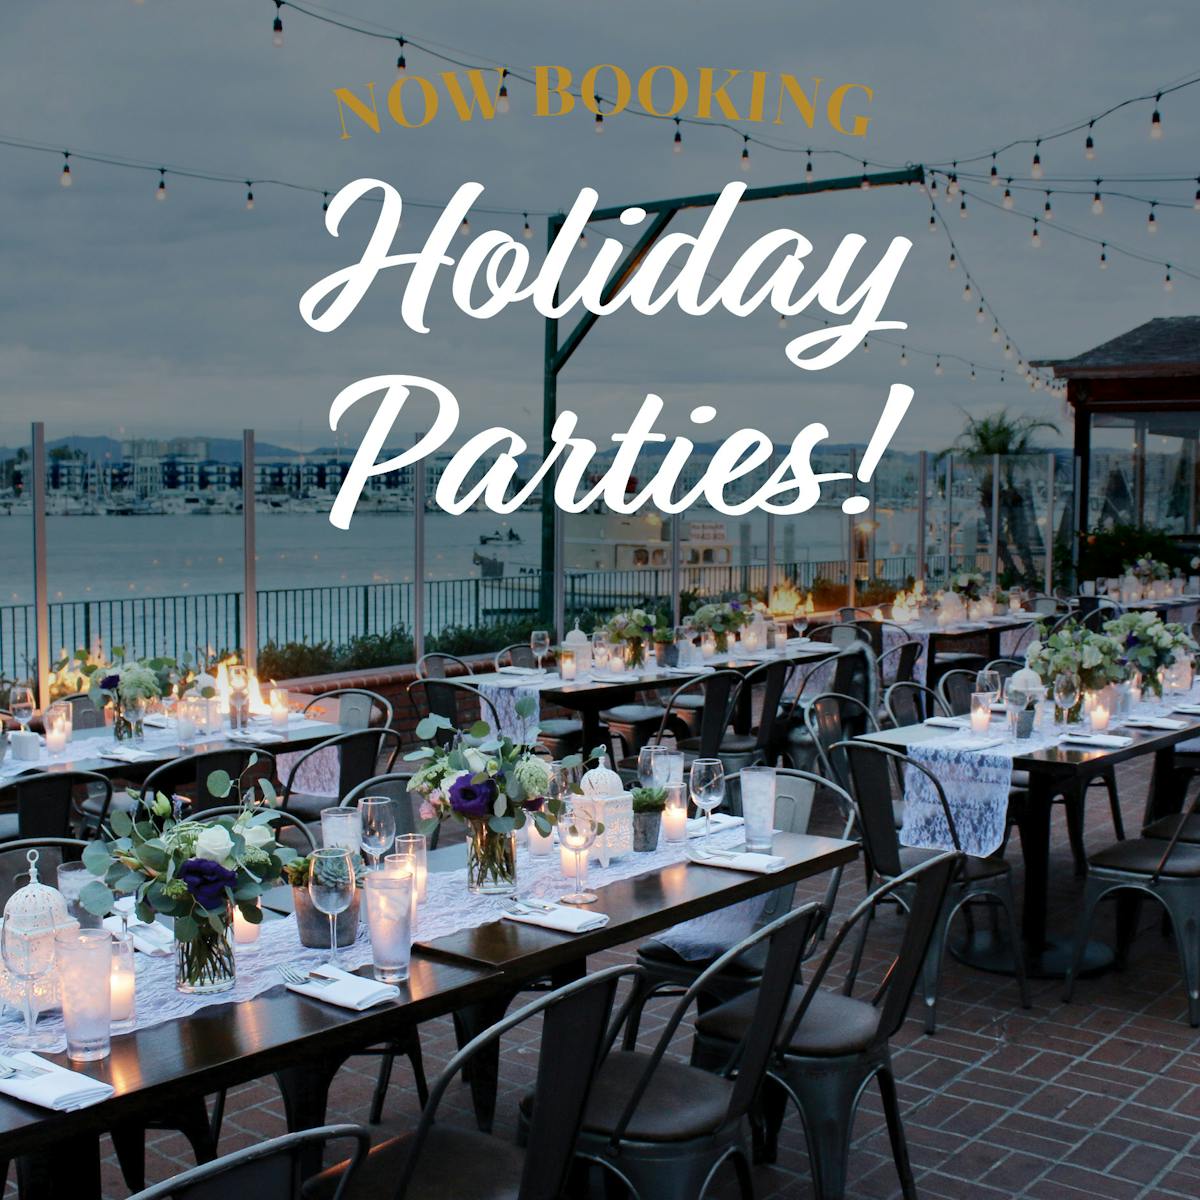 now booking holiday parties with deck setup